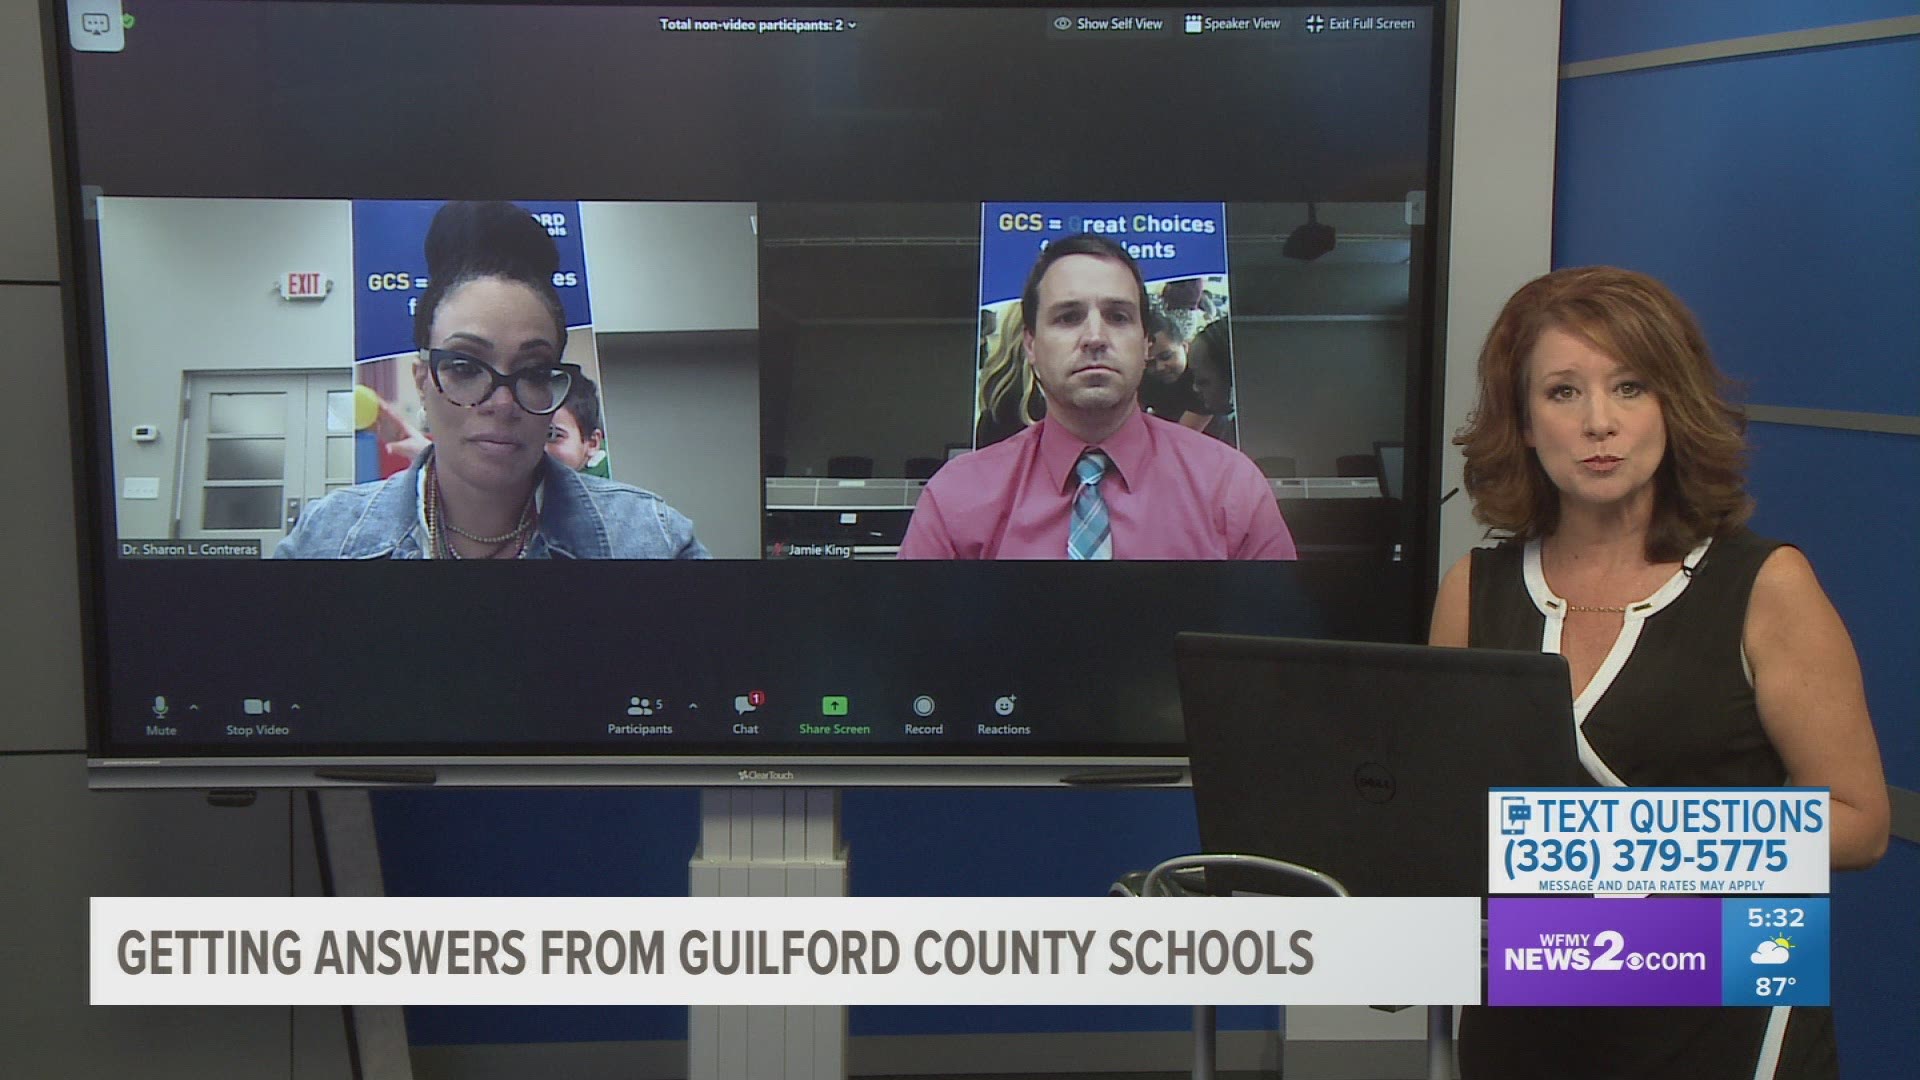 Guilford County Schools leaders answer your questions on what to expect for next school year during the coronavirus pandemic.